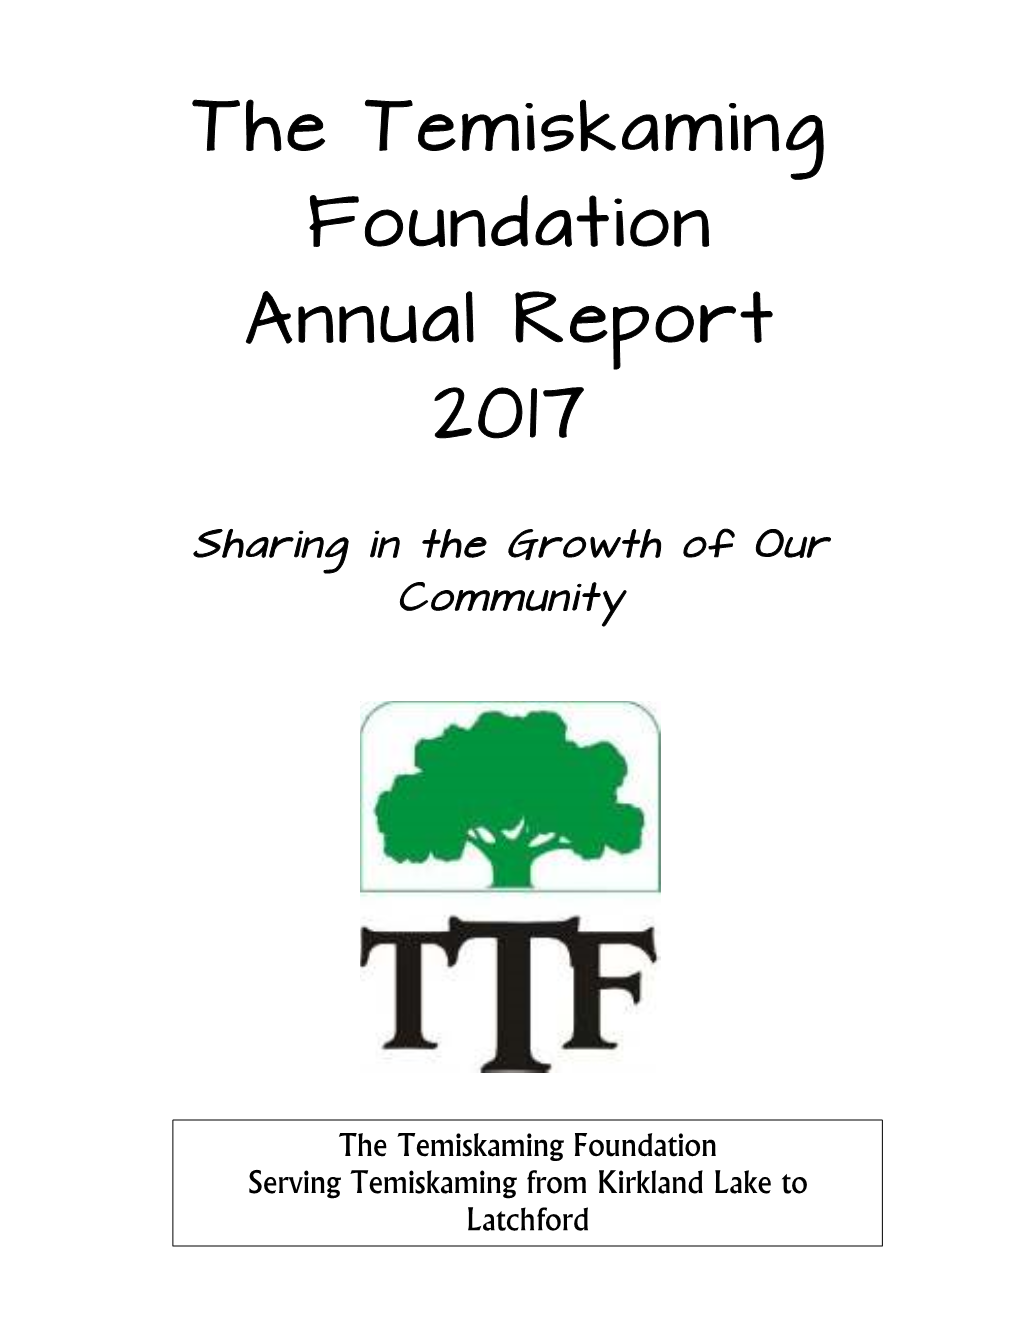 The Temiskaming Foundation Annual Report 2017